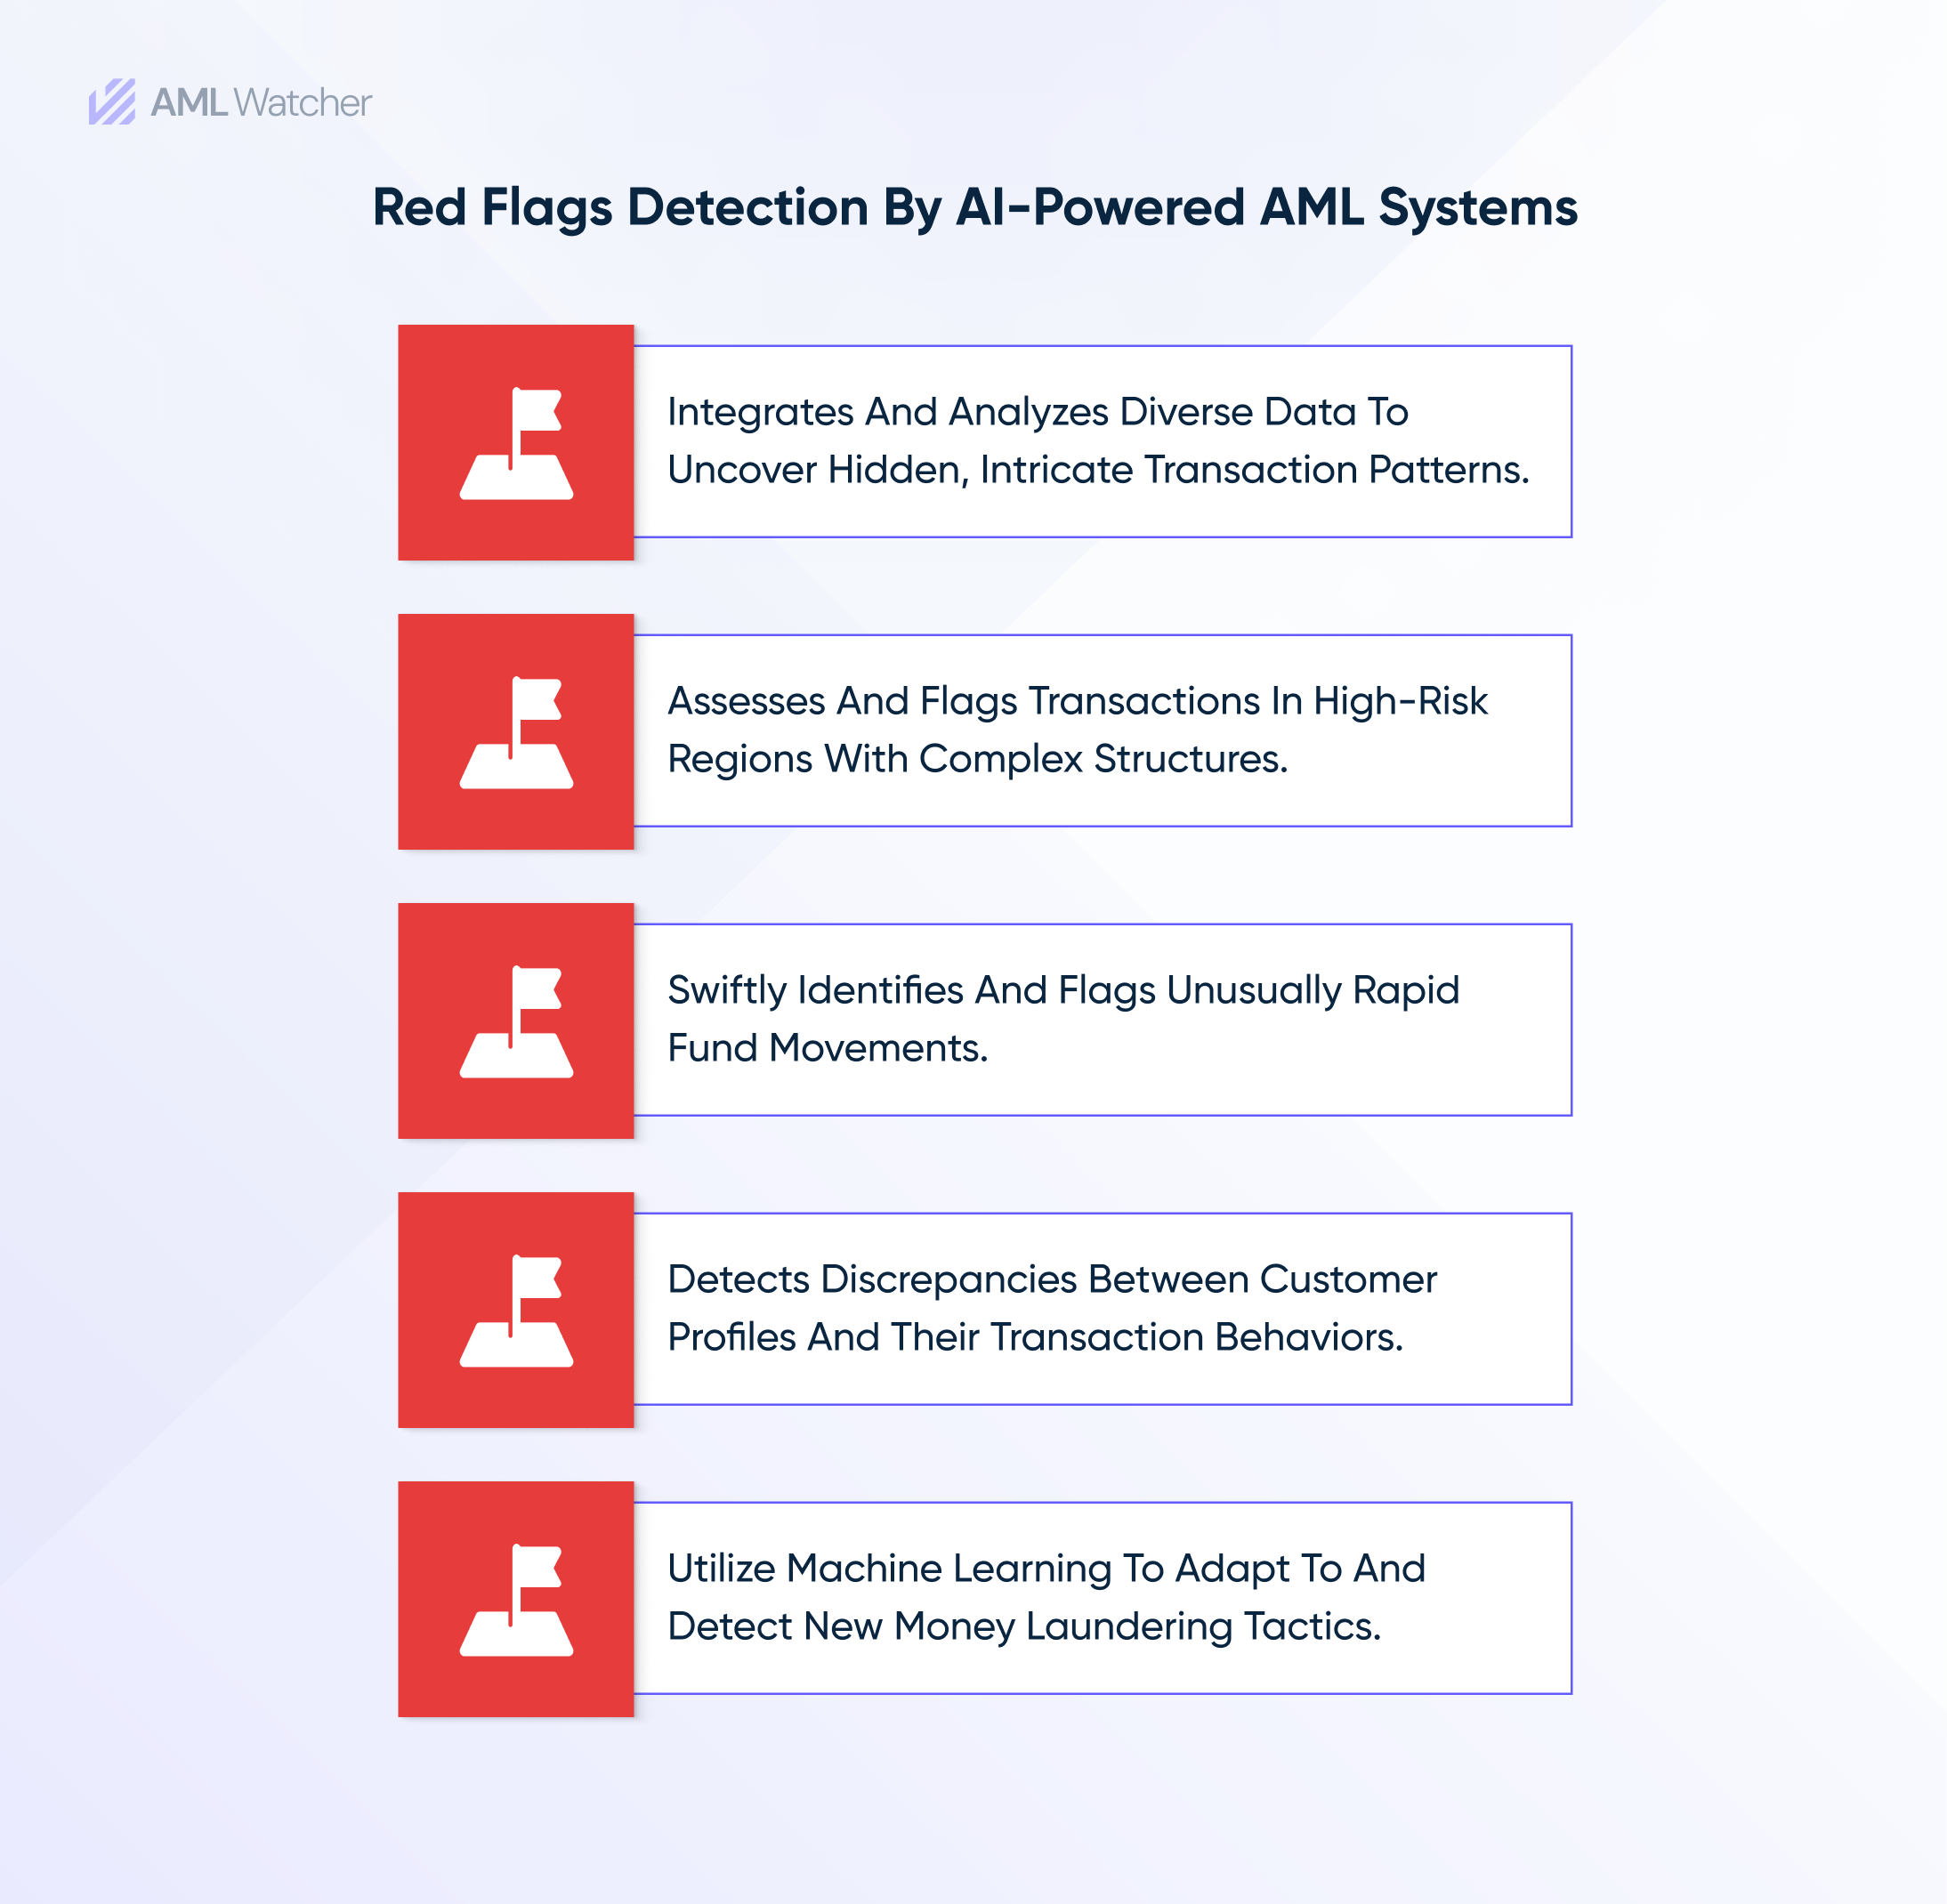 This image shows the AML red flags that can easily detected by AI-enhanced systems, unlike older systems.